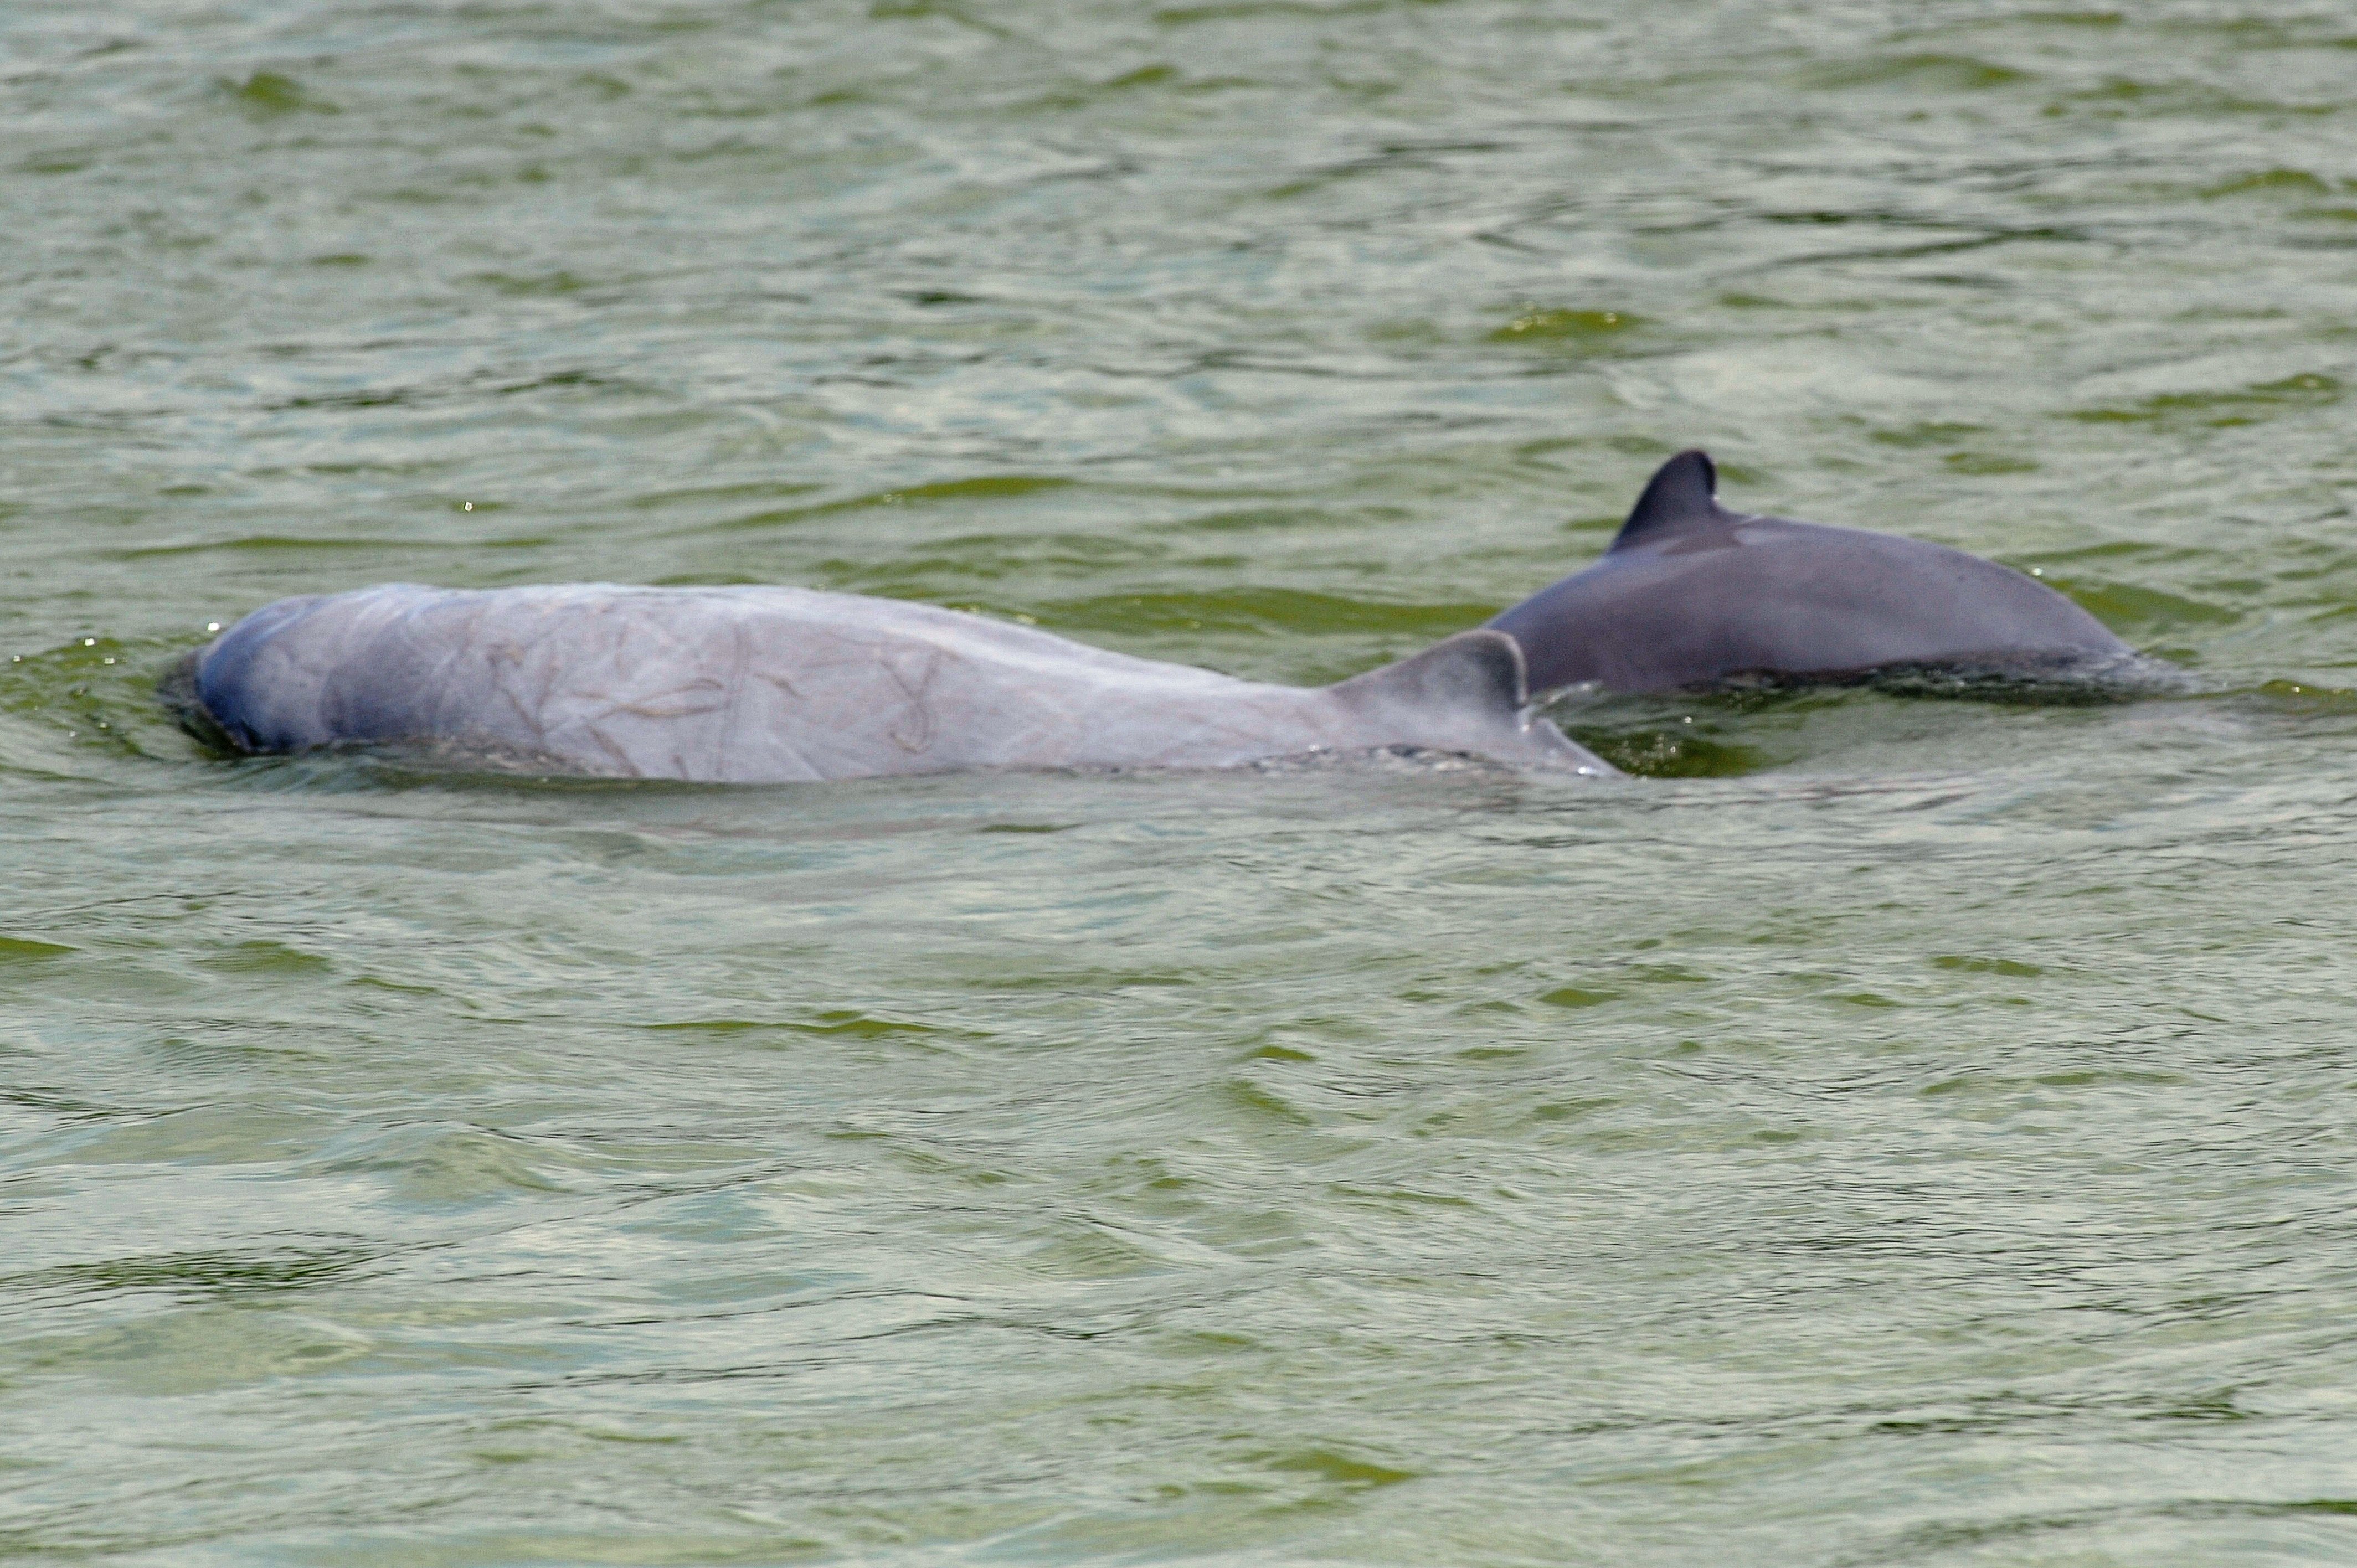 File photo: Dolphins in Mekong river in December 2012